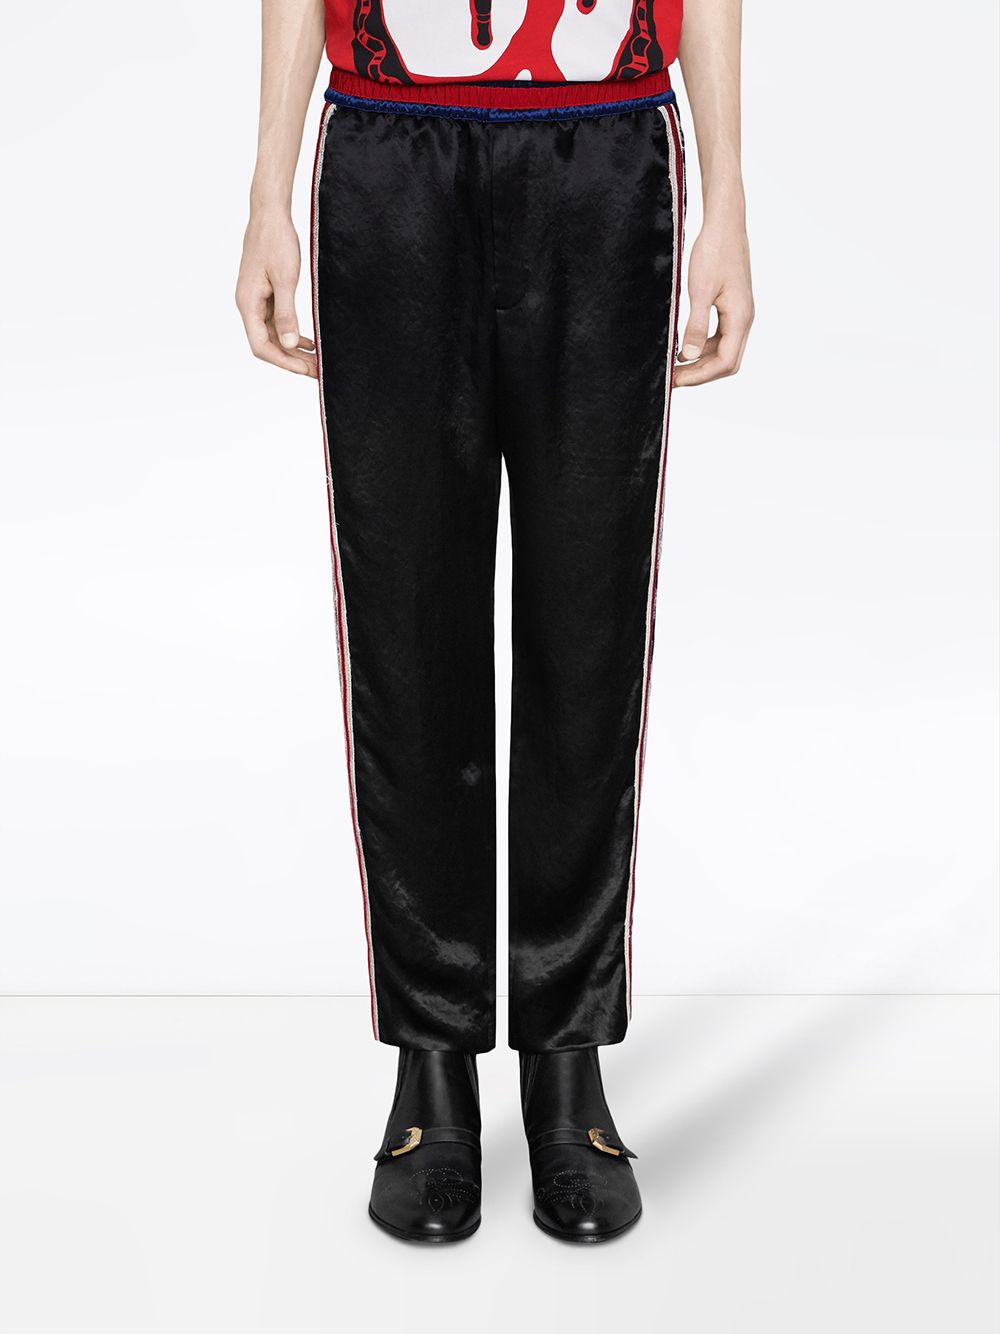 Gucci Embroidered Acetate Jogging Pant - Farfetch